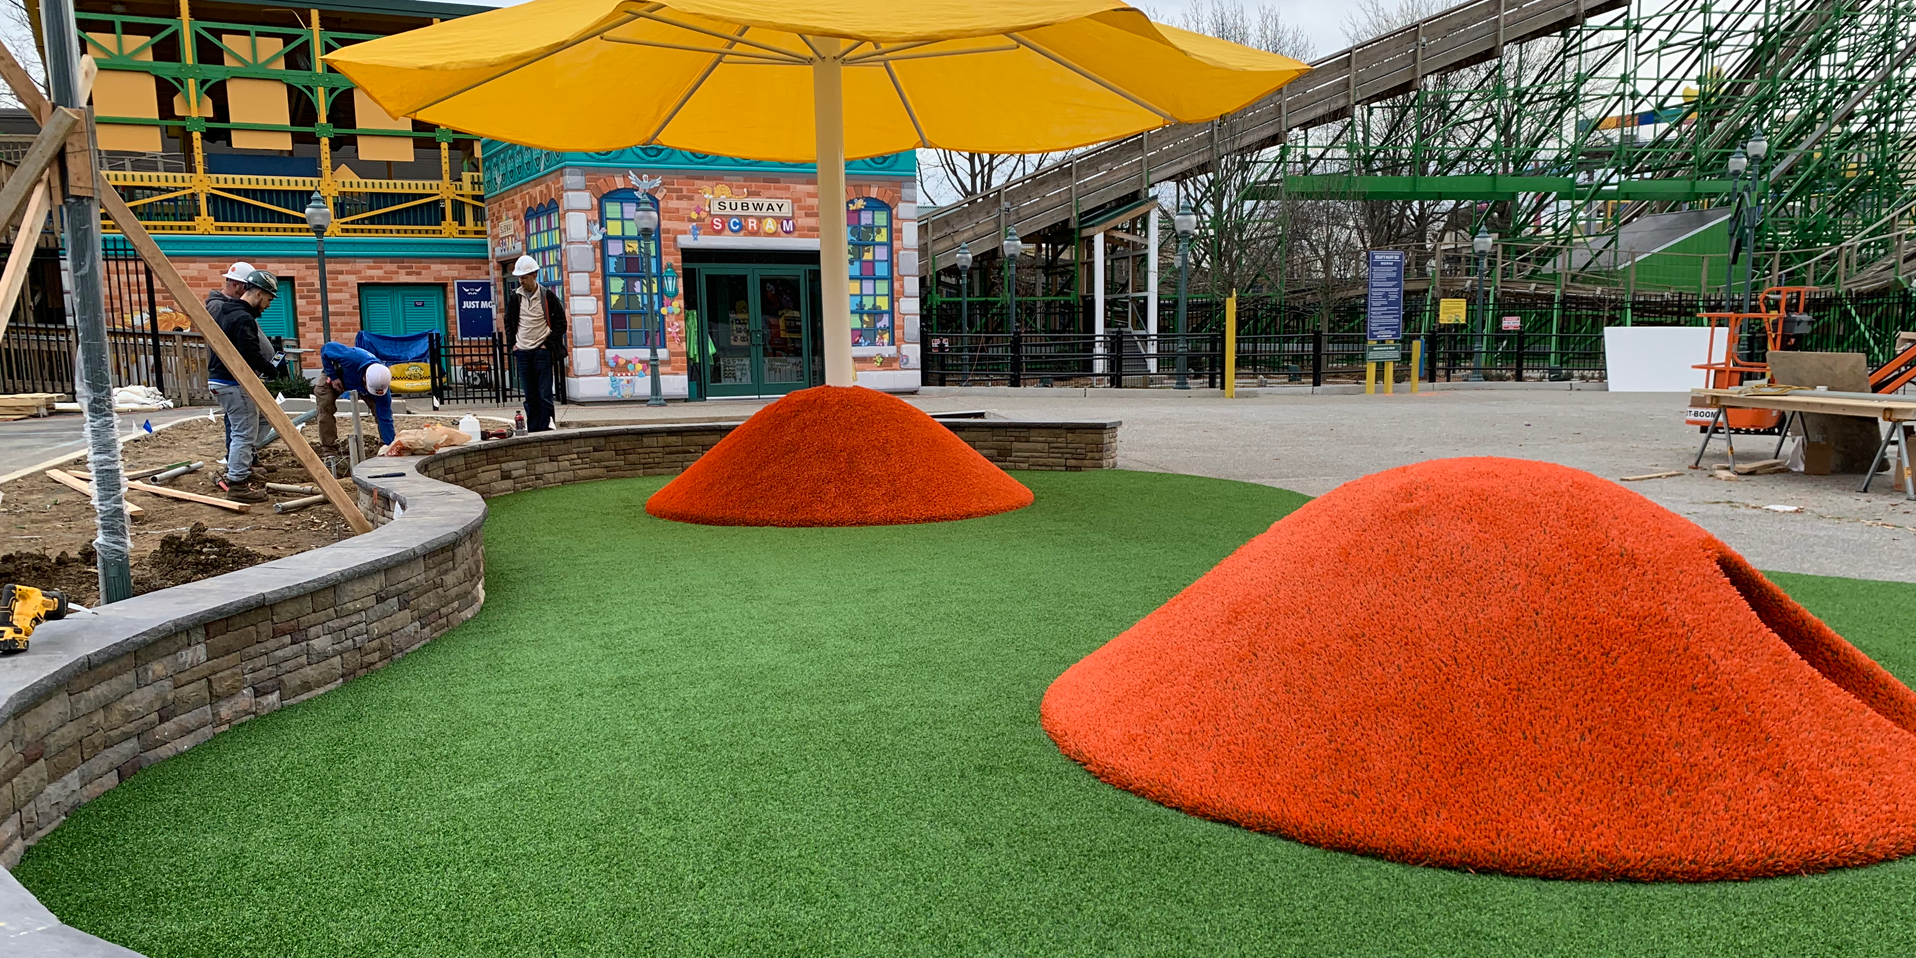 image of artificial grass at Sesame Place